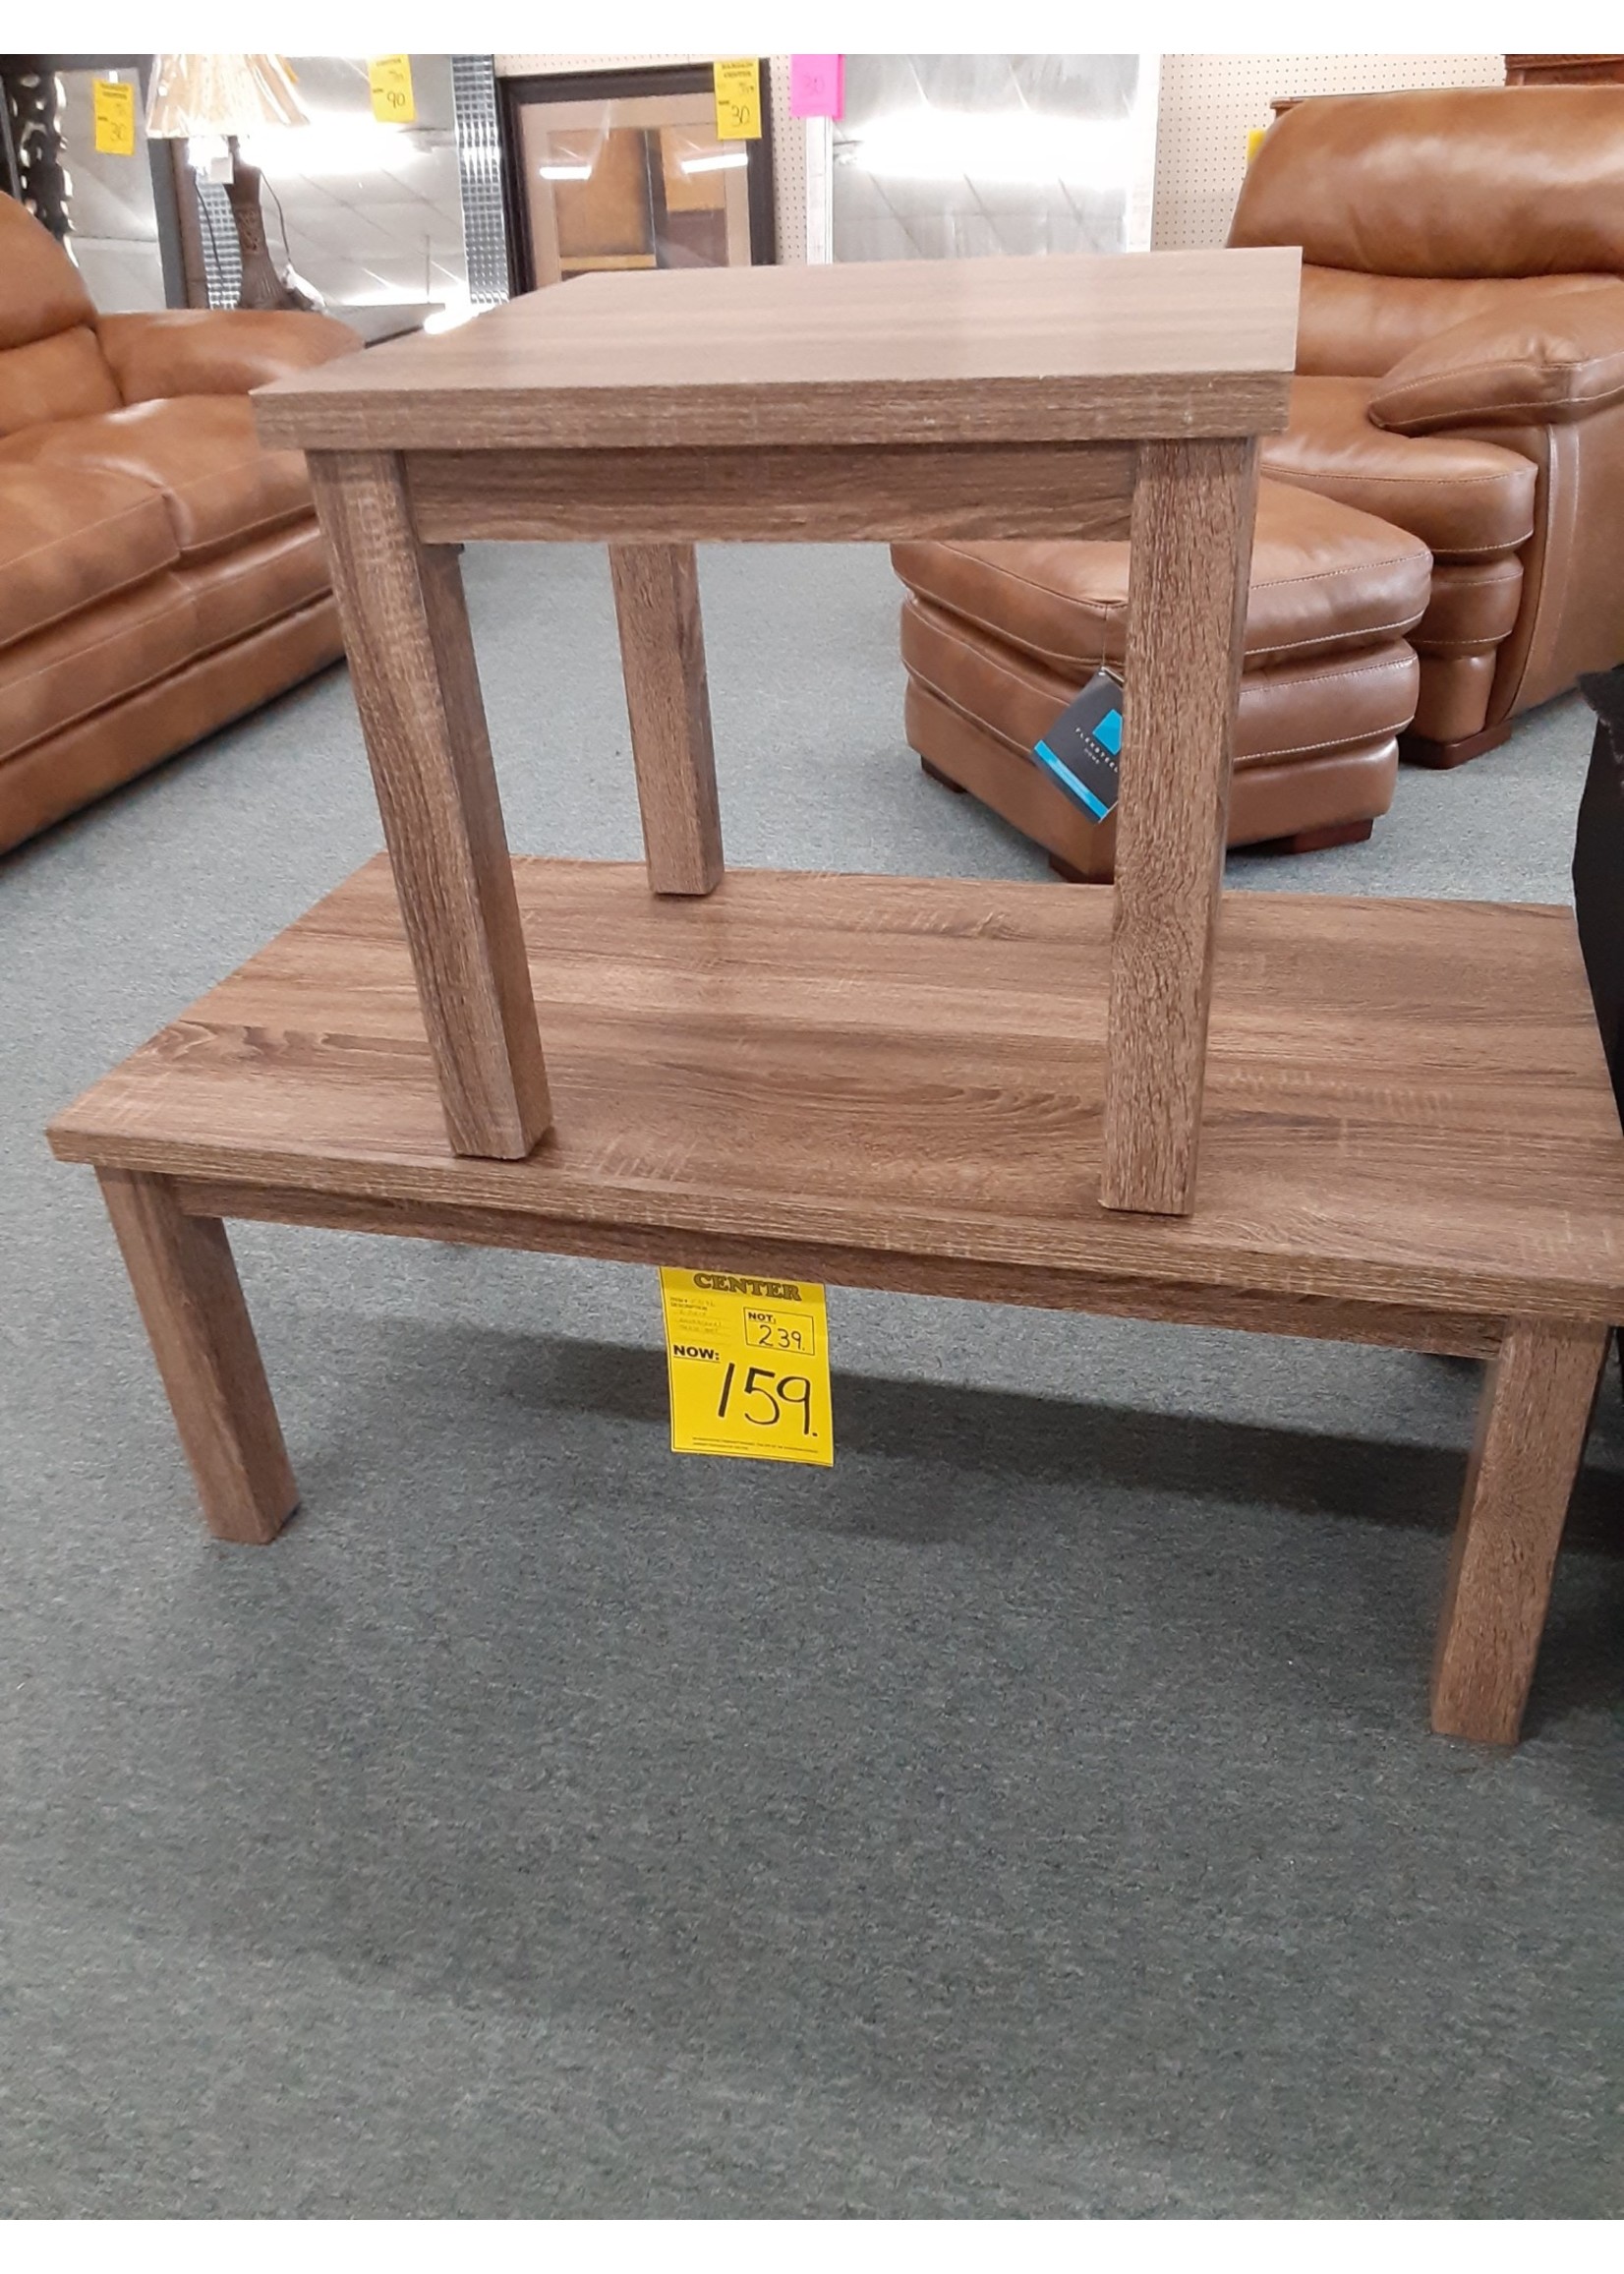 2 PIECE OCCASIONAL TABLE SET WITH WOOD GRAIN FINISH